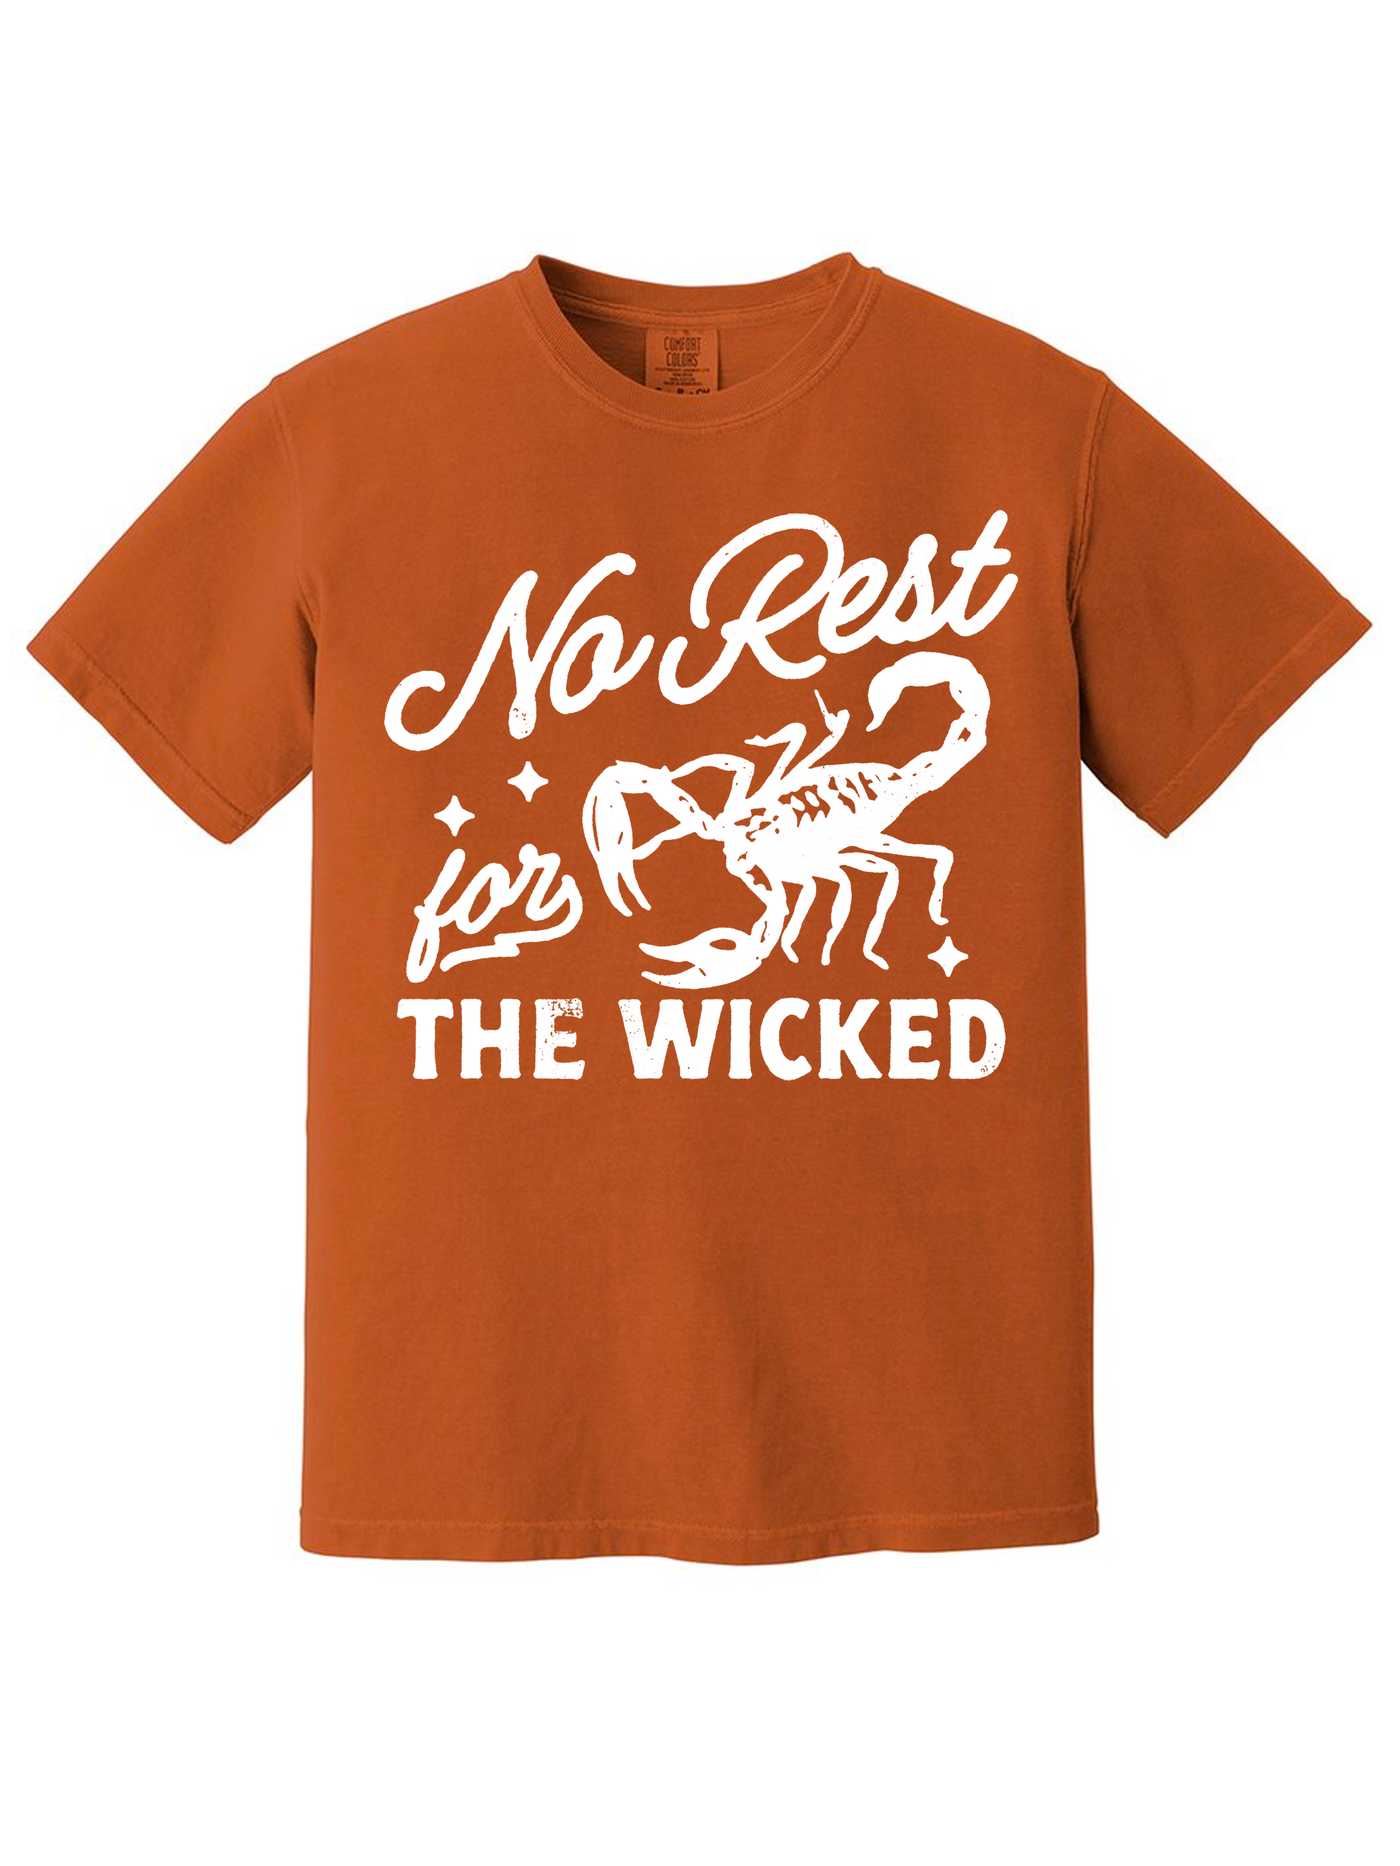 Ain't No Rest For The Wicked Yam Tee/Sweatshirt